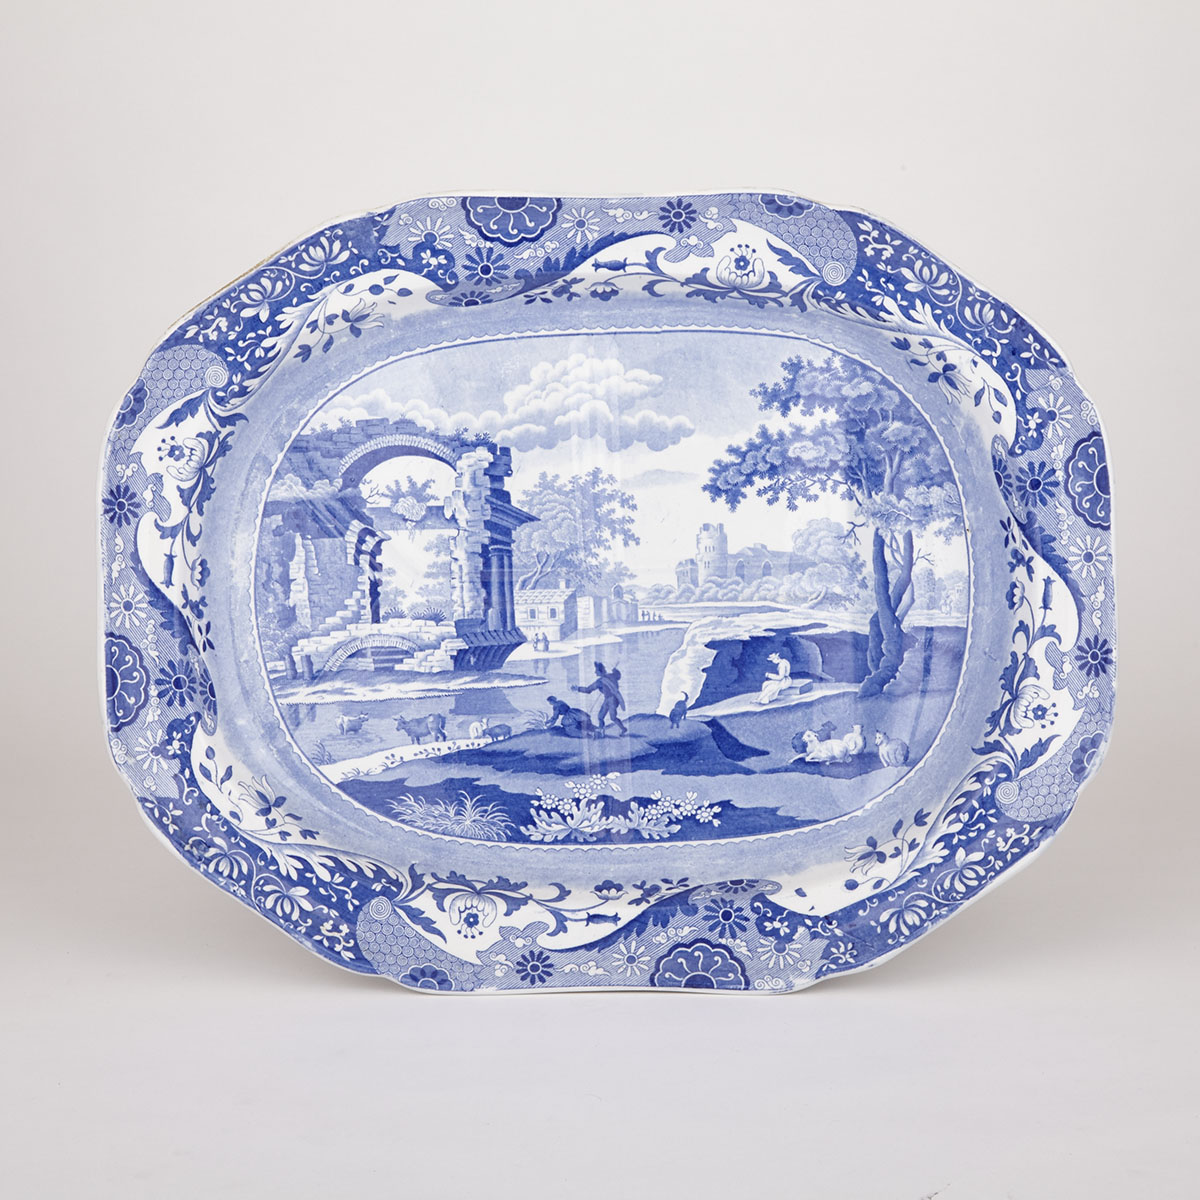 Spode Blue-Printed ‘Italian’ Well-and-Tree Platter, c.1825